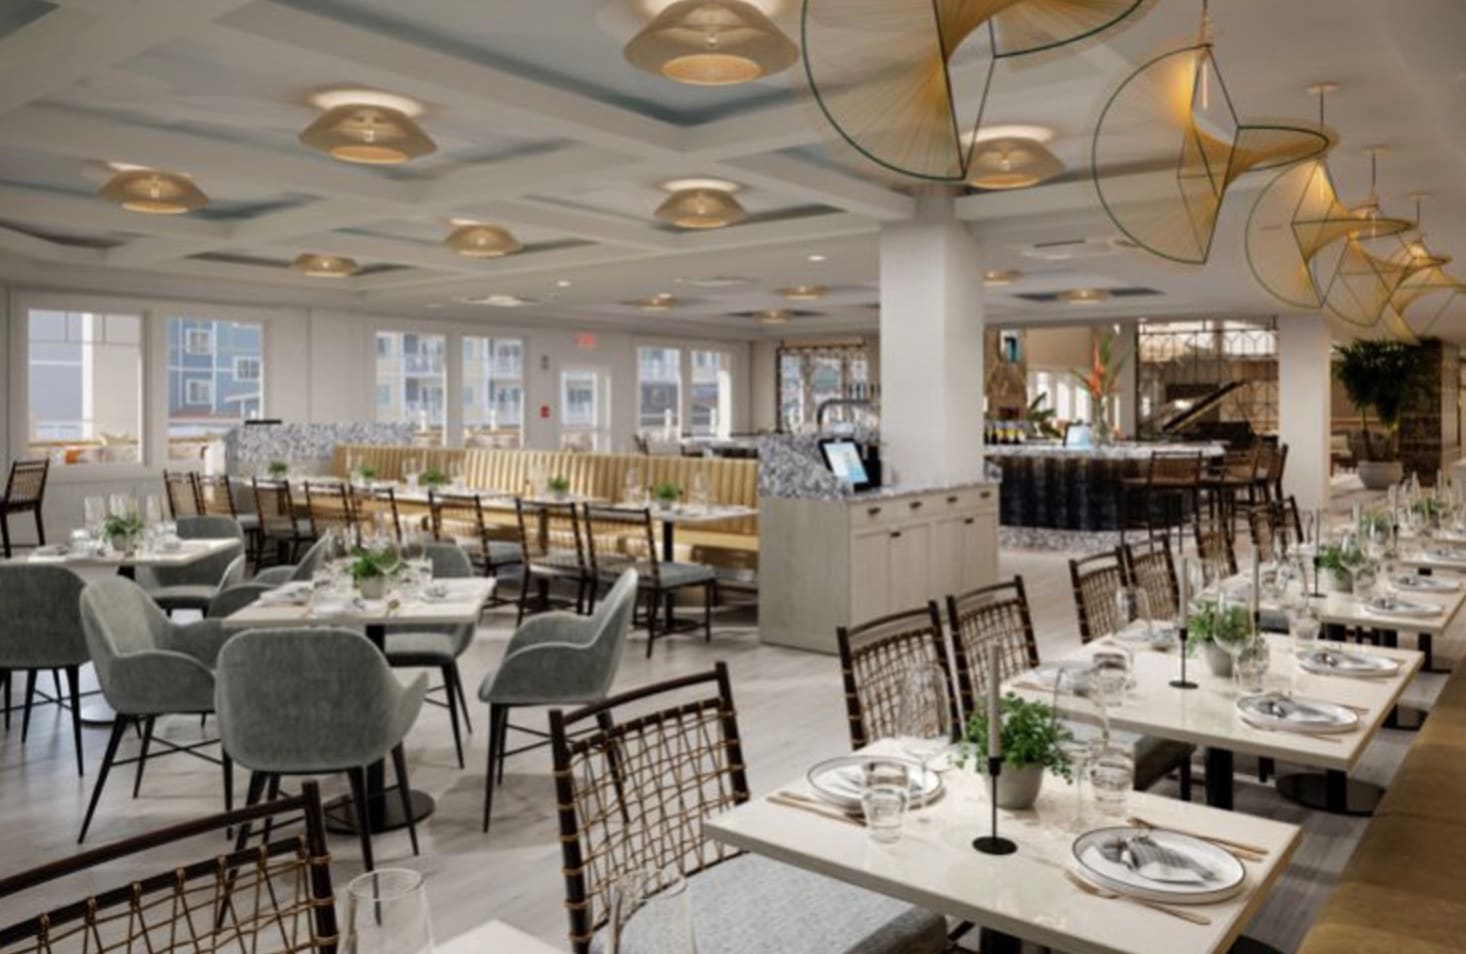 Via Sophia by the Sea will be the new restaurant at the Bethany Beach Ocean Suites Residence Inn by Marriott.